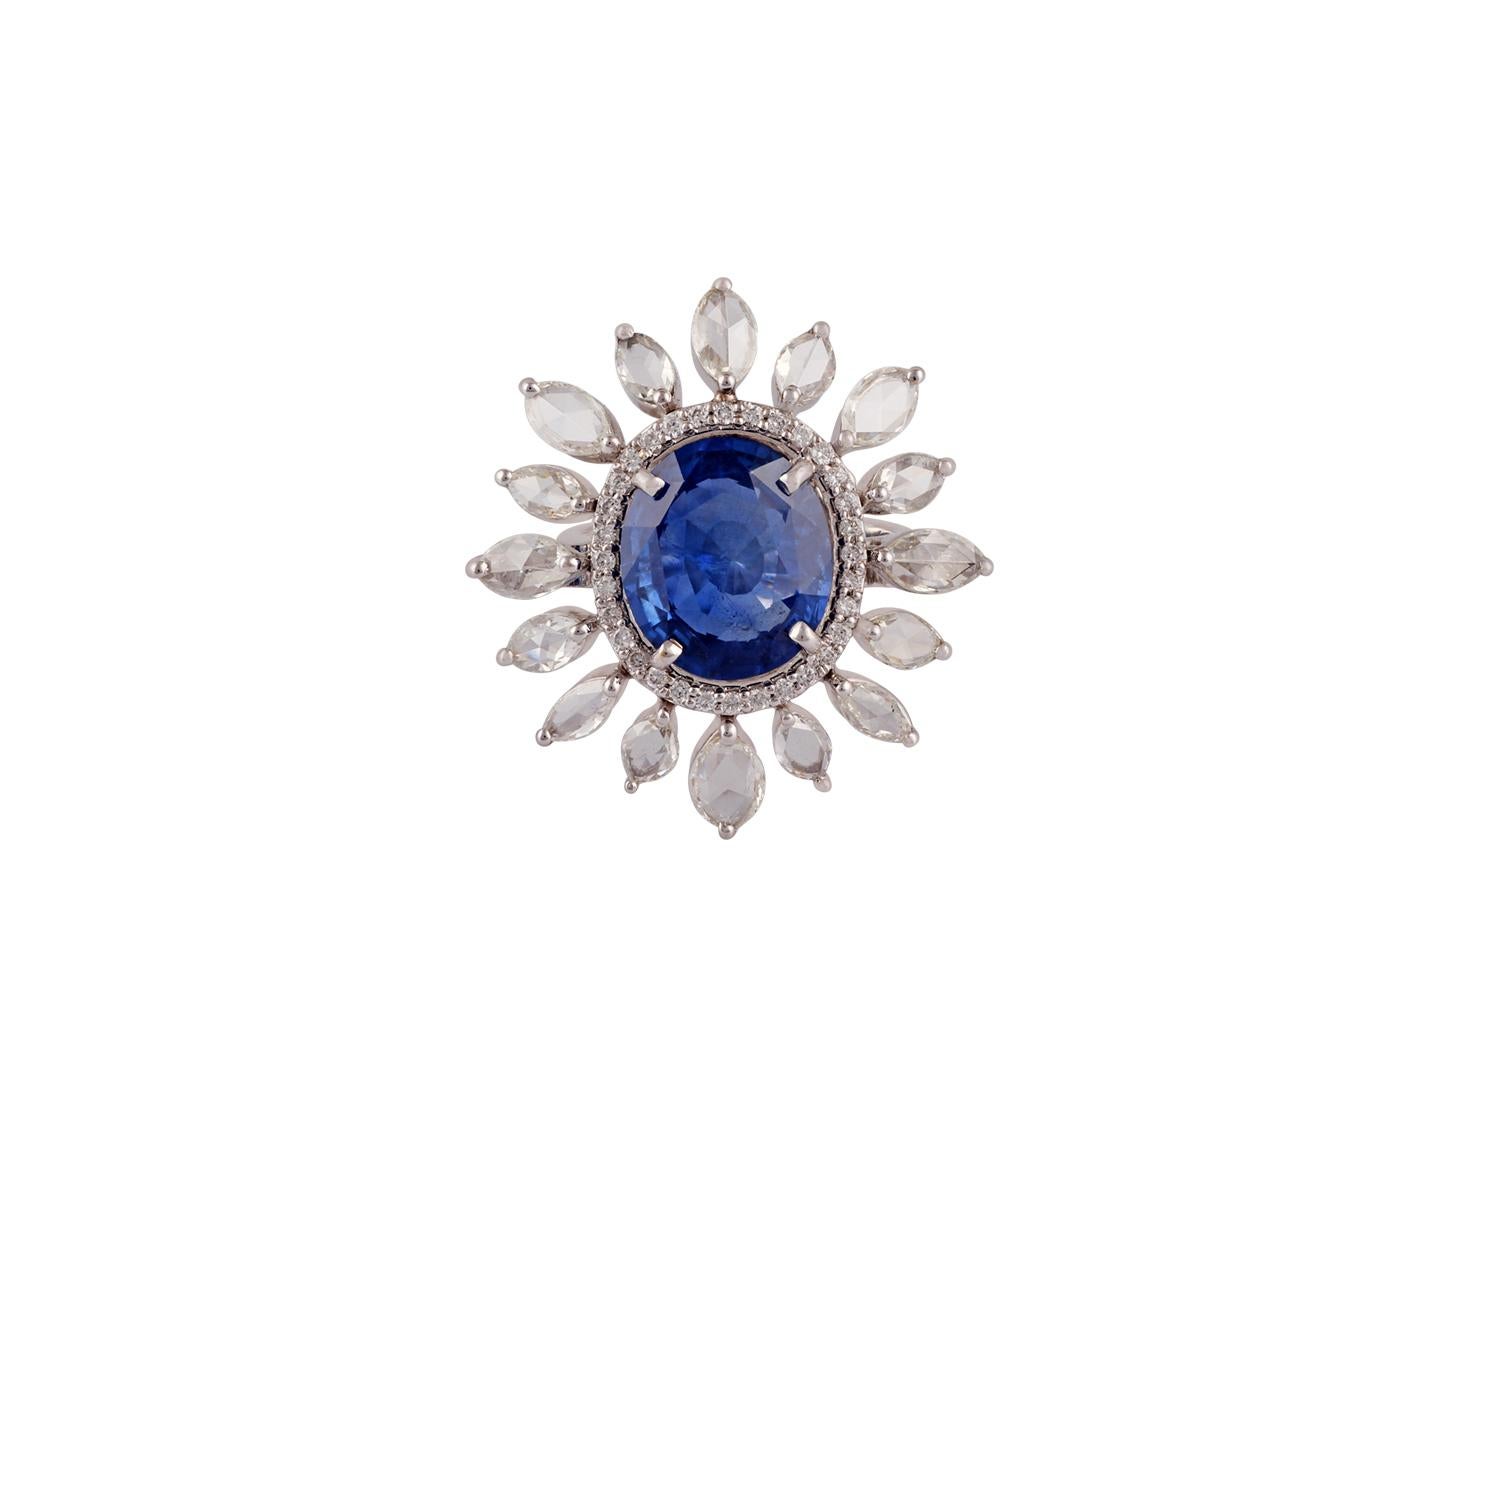 This is an exclusive blue sapphire & diamond cluster ring studded in 18k gold features 1 piece of fine quality oval shaped blue sapphire weight 6.37 carat with 16 pieces of rose cut diamonds weight 2.21 carat & round shaped diamonds in the cluster